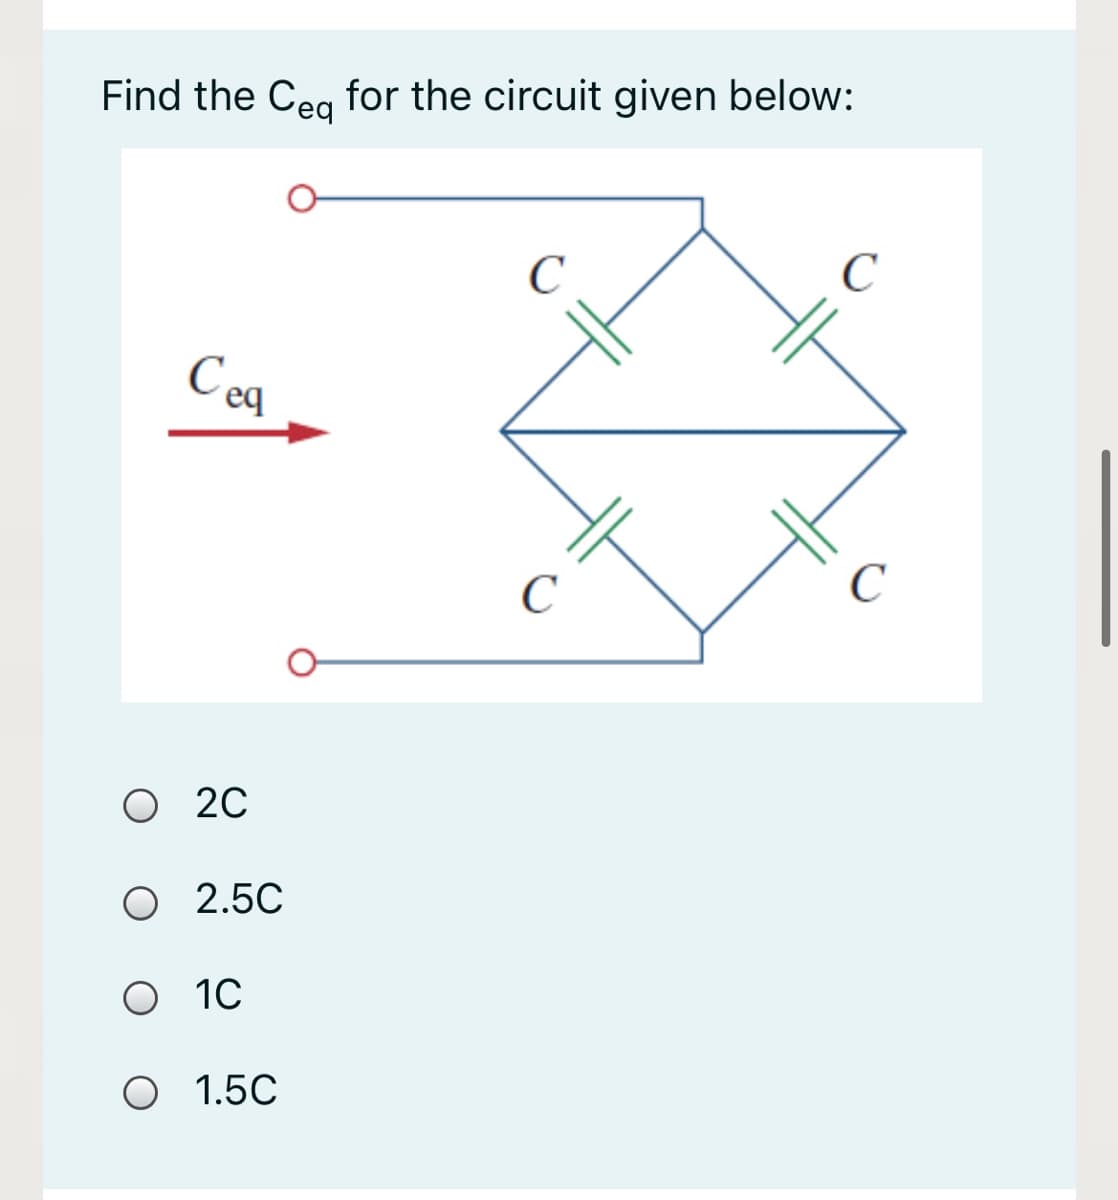 Find the Cea for the circuit given below:
C
C
C
C
O 20
O 2.5C
O 10
O 1.5C
